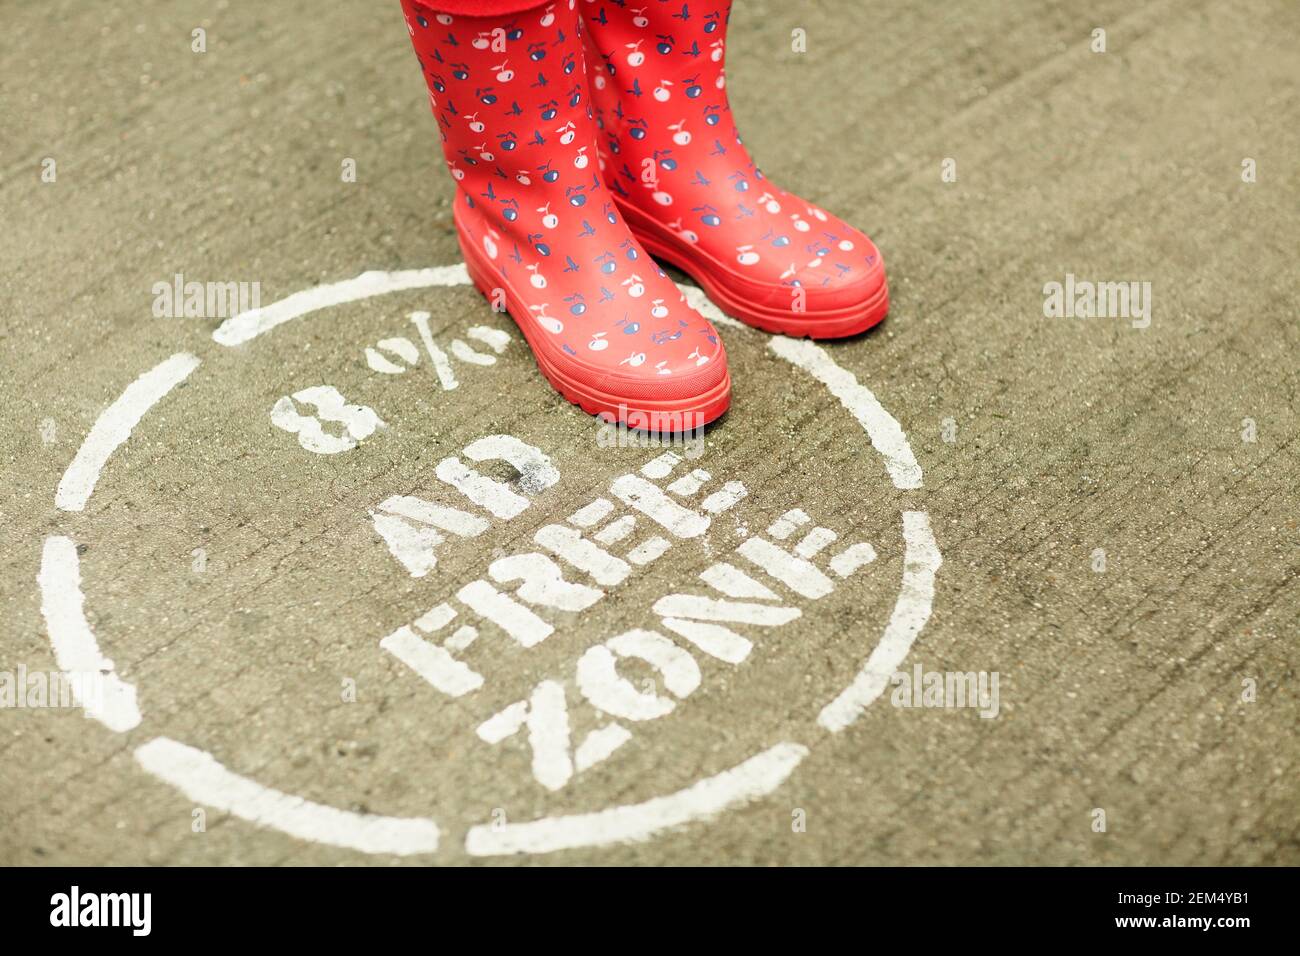 High angle view of a pair of galoshes on a warning sign Stock Photo